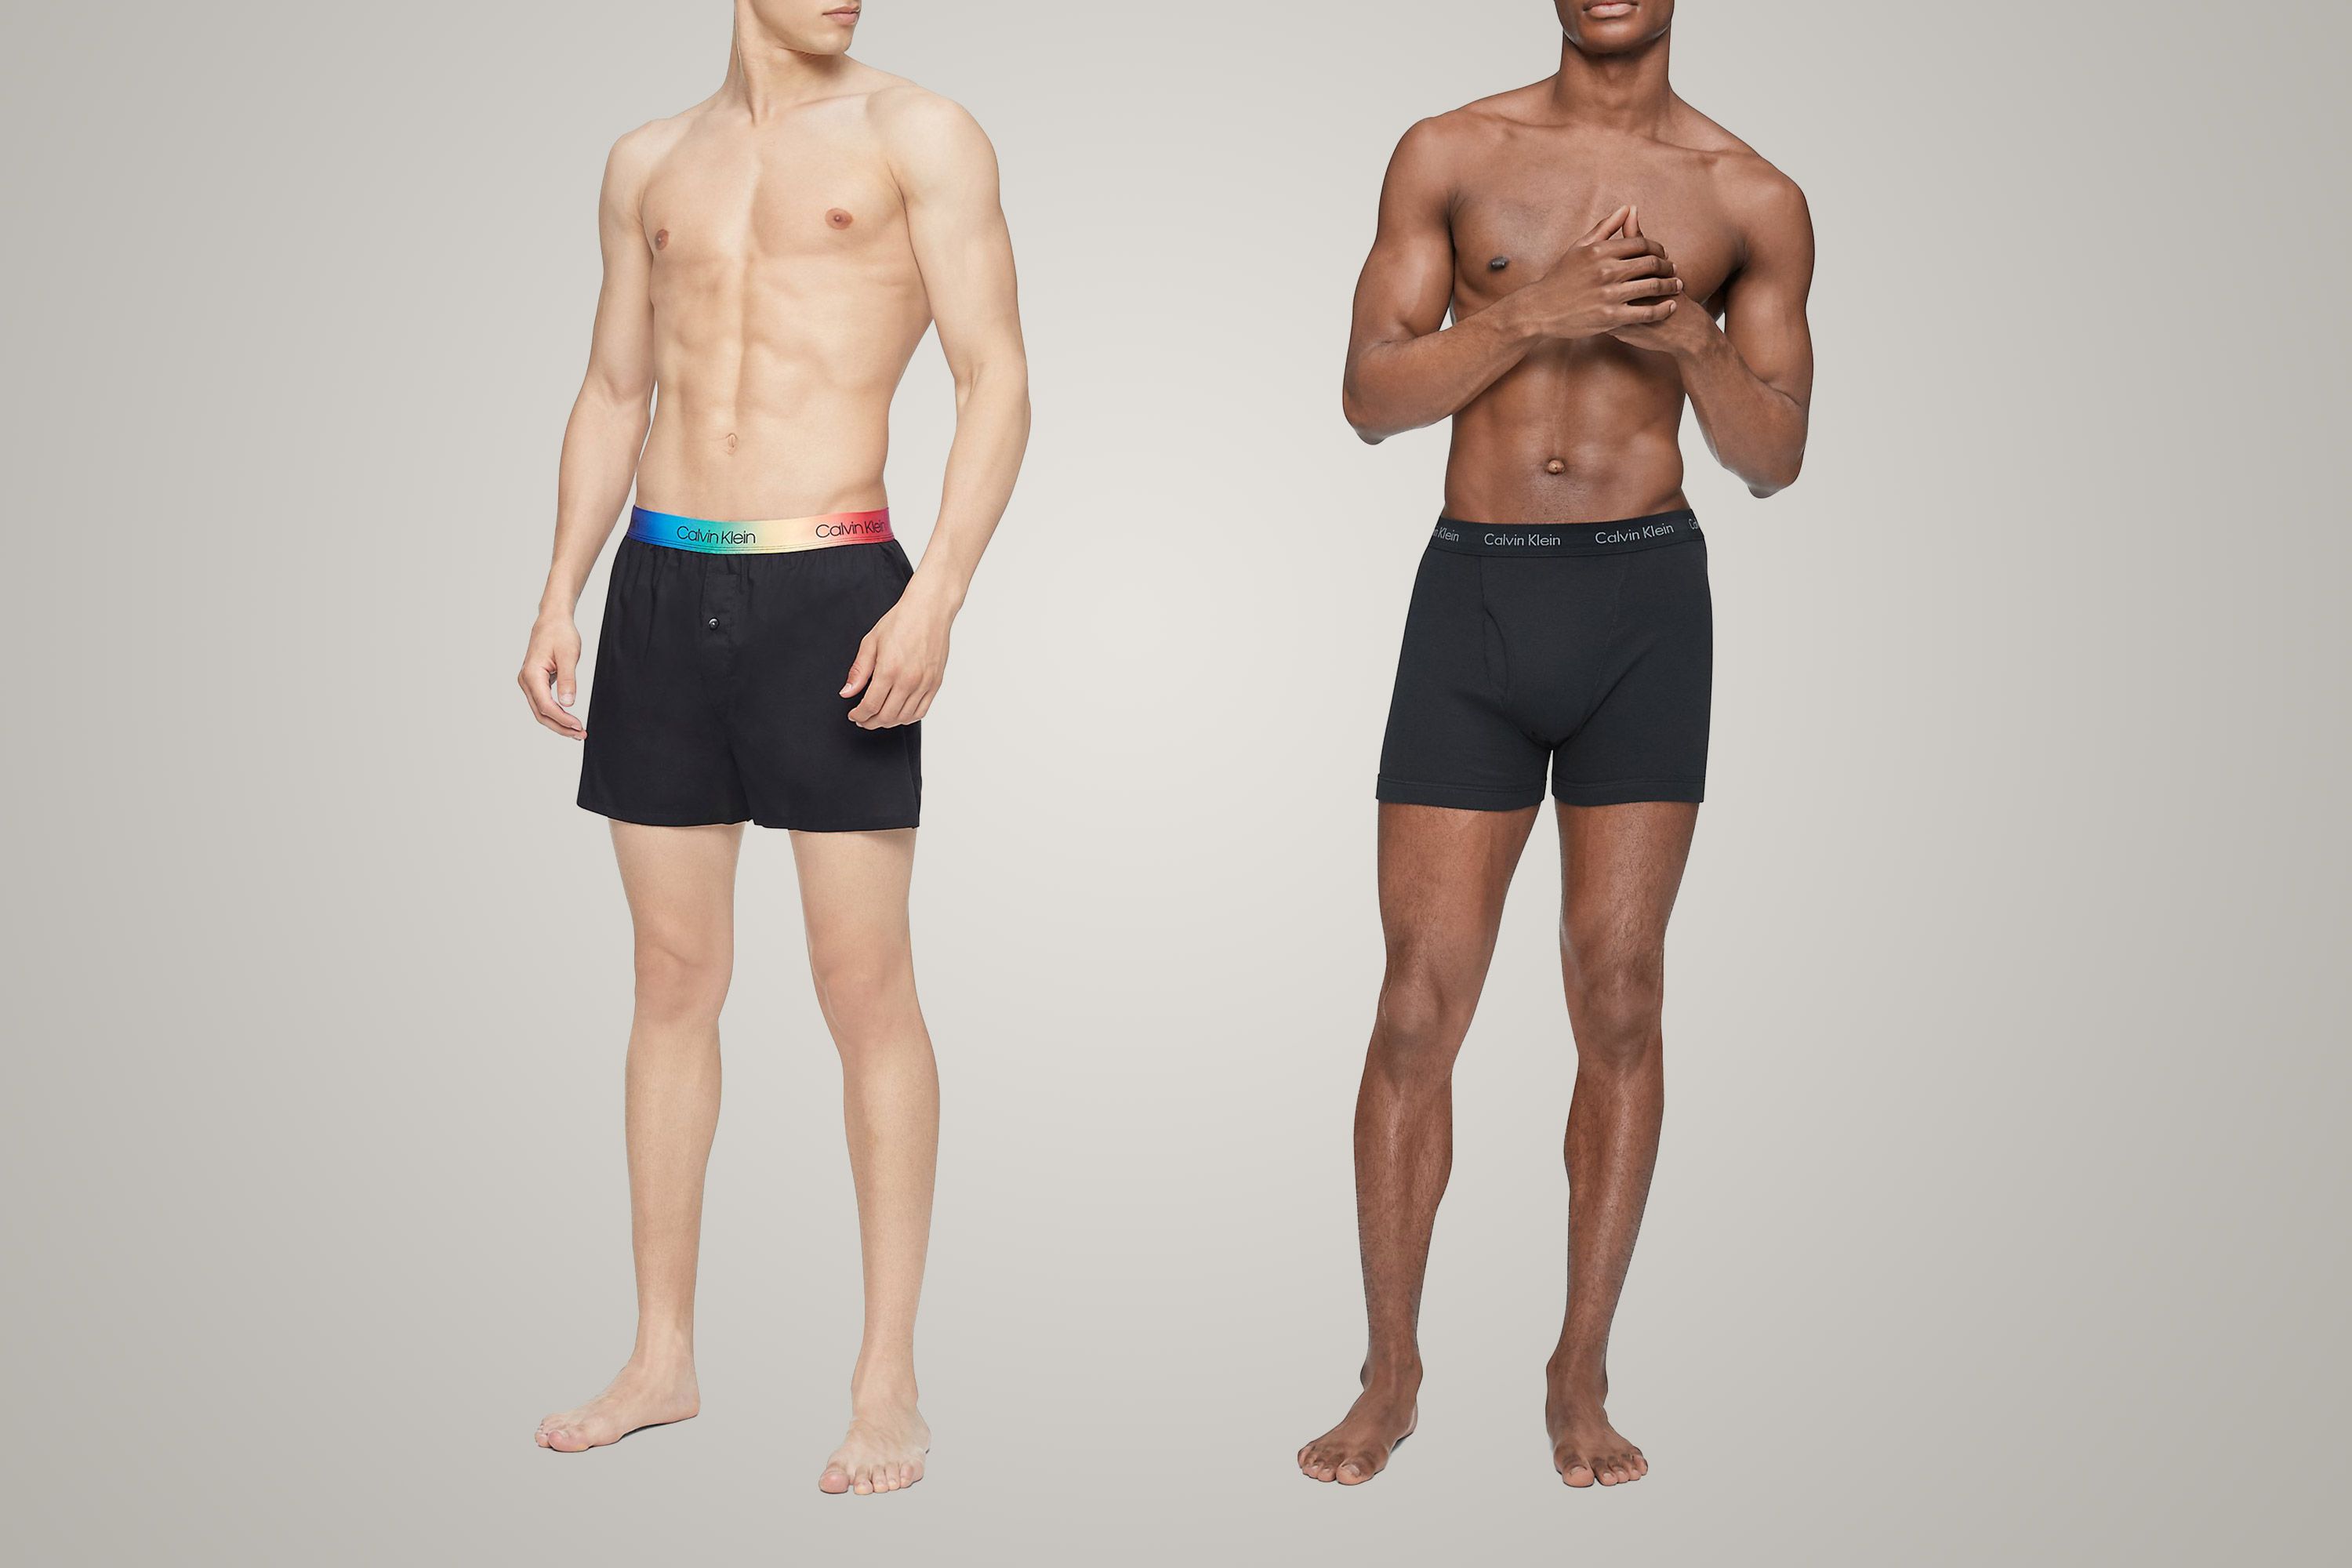 Boxers vs. Boxer Briefs: Is One Style Better Than the Other?